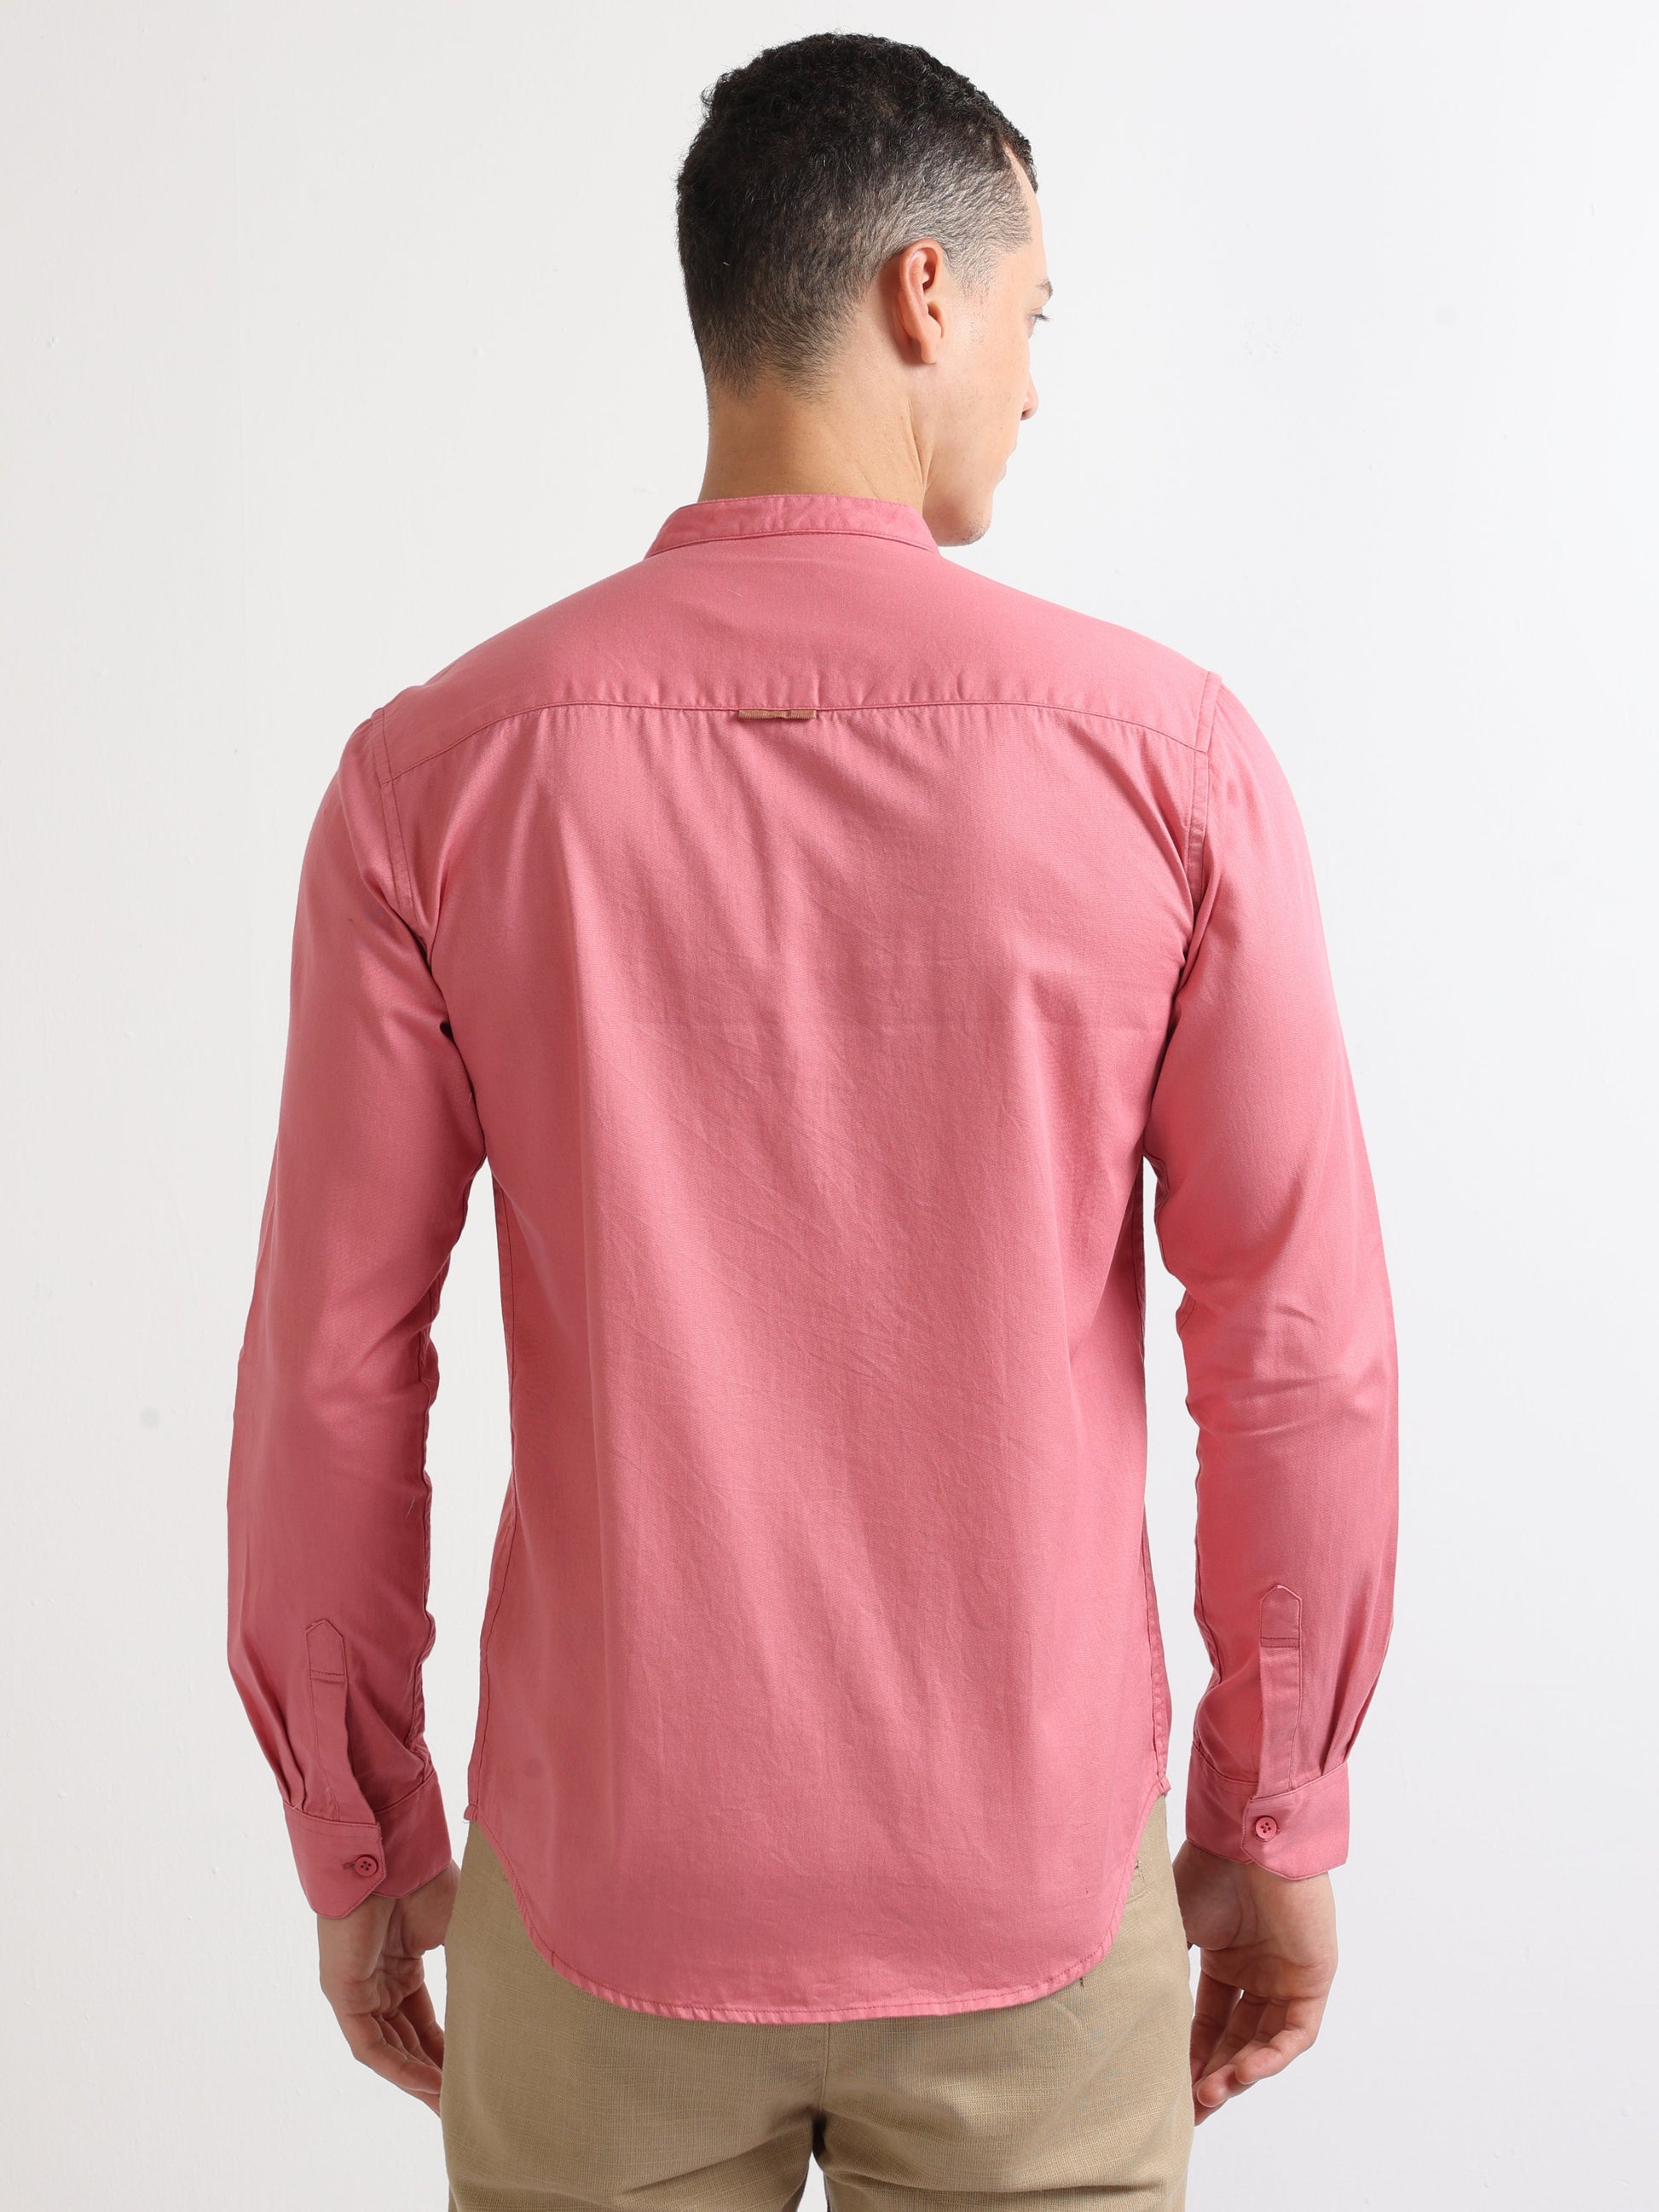 Buy Chinese Collar Fashionable Double Pocket Shirt Online.